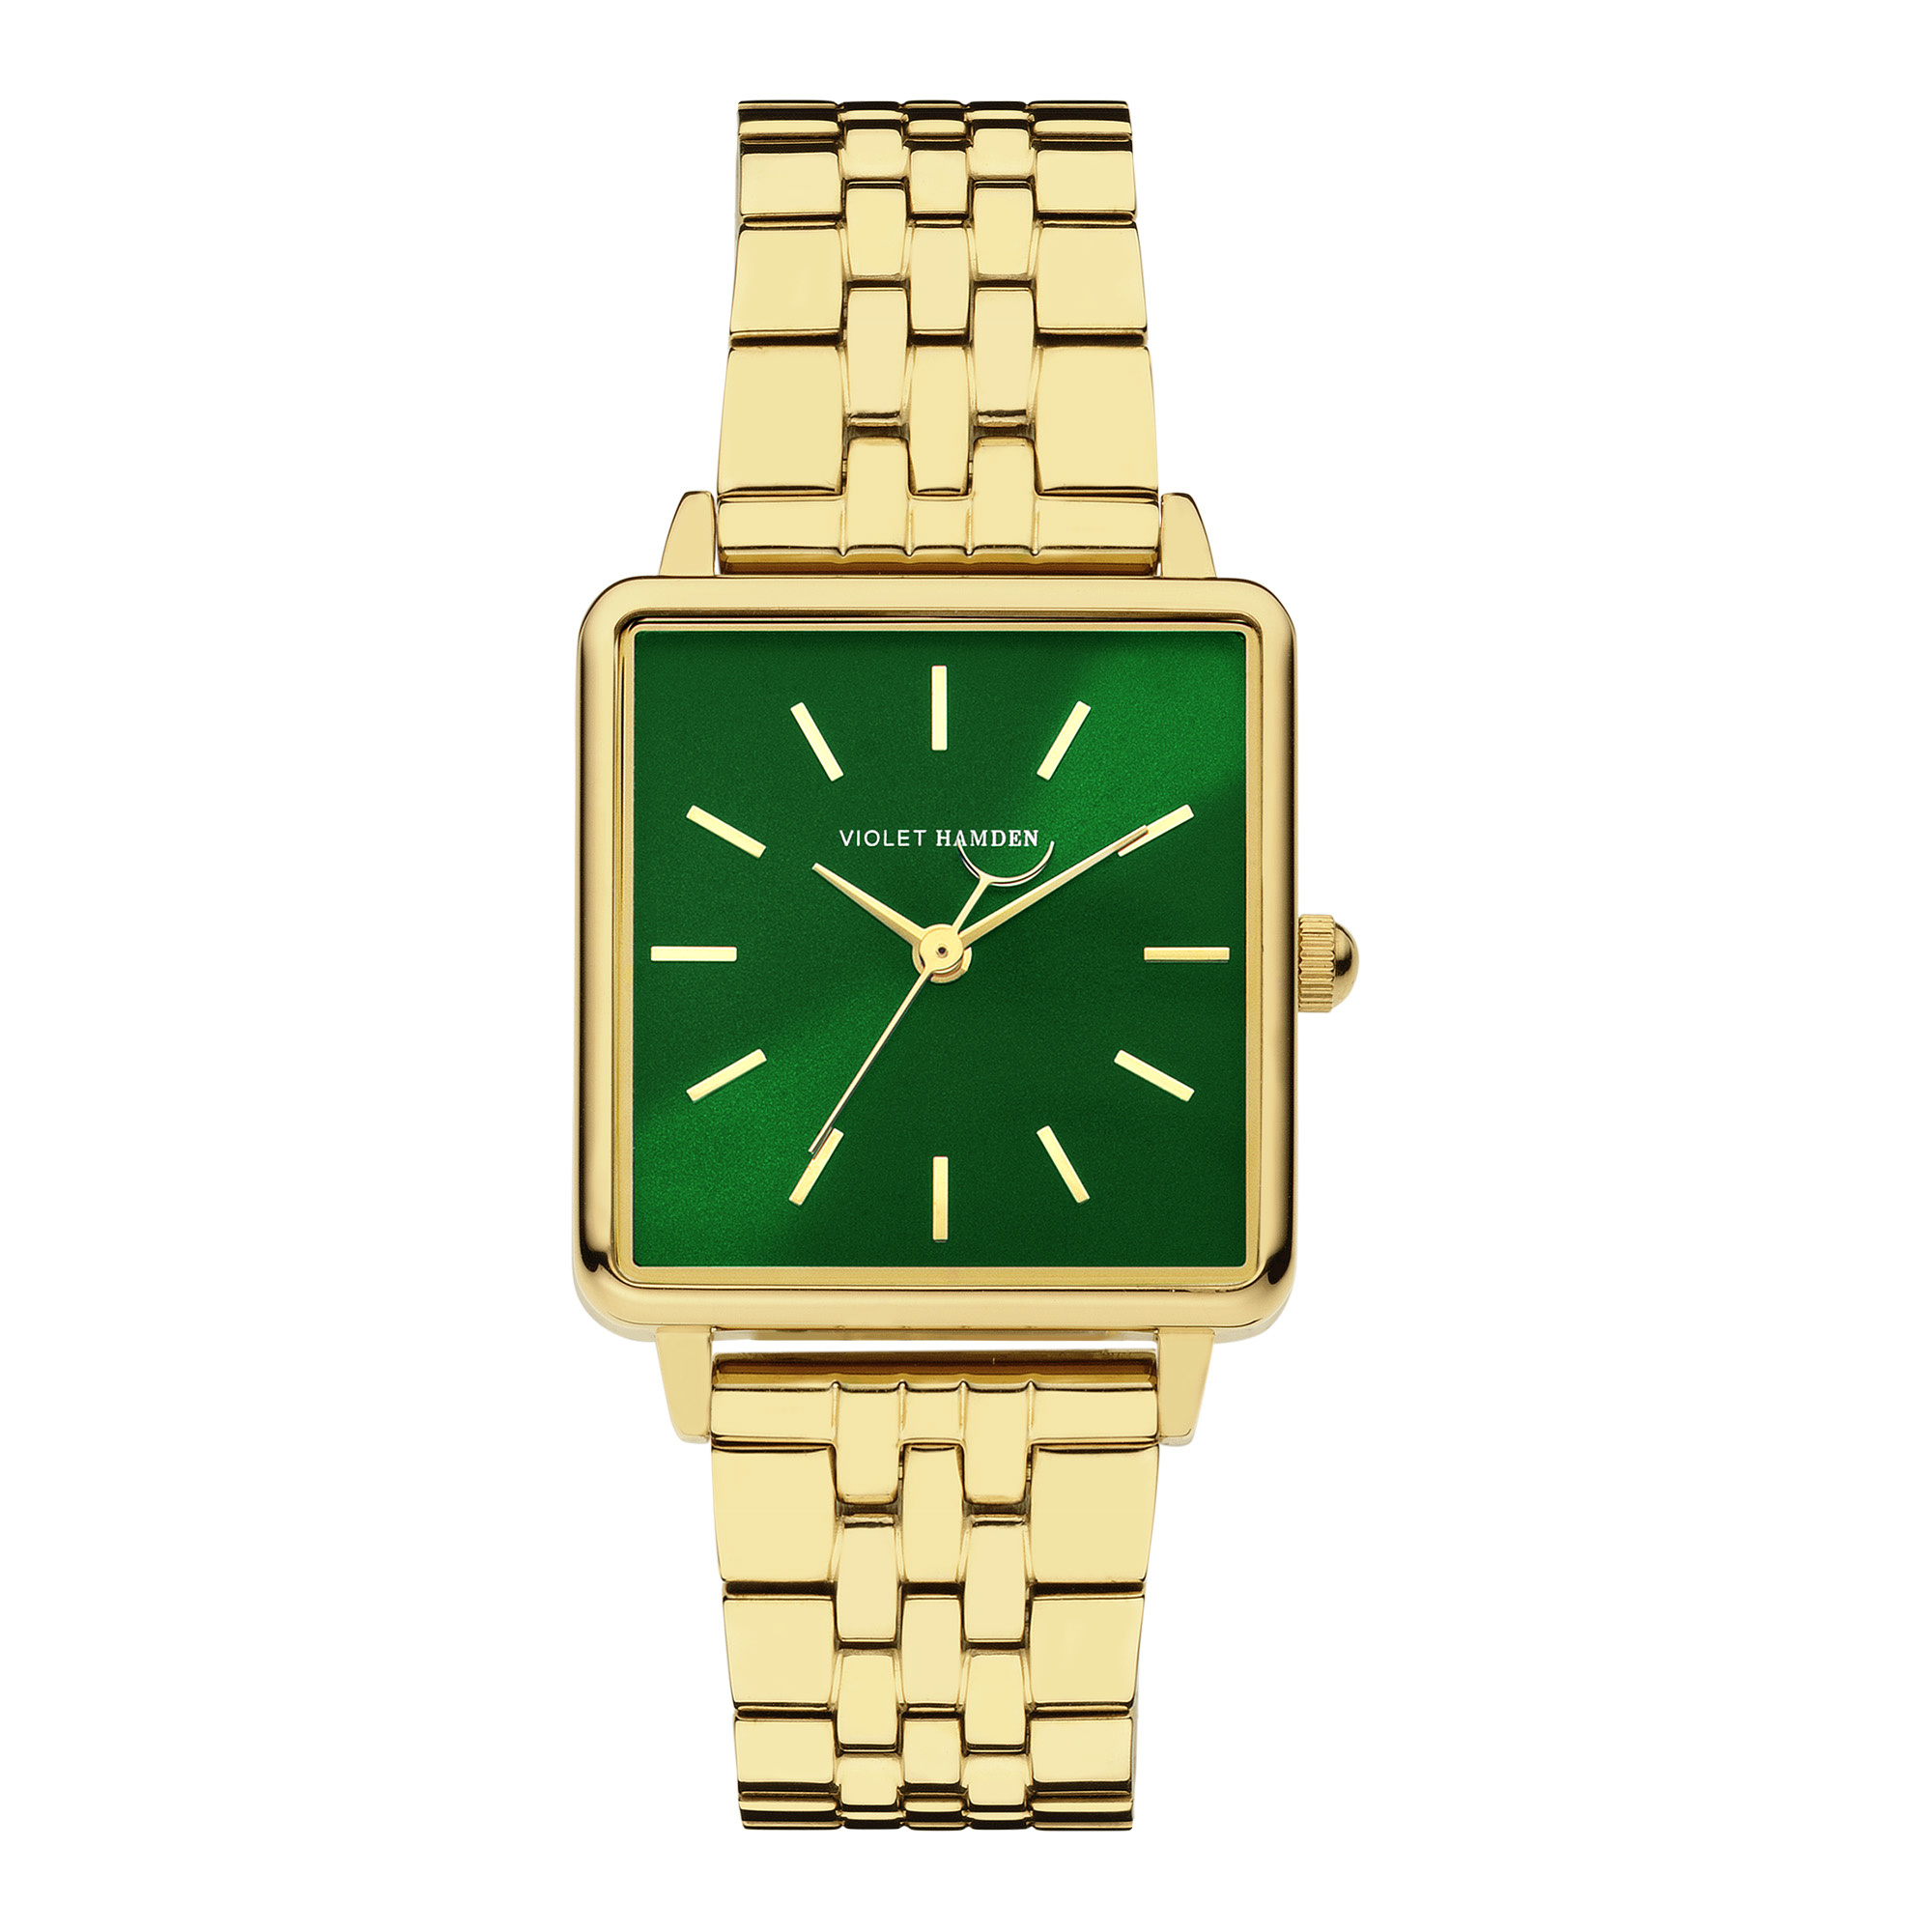 Violet Hamden - square ladies watch gold coloured and green VH09026